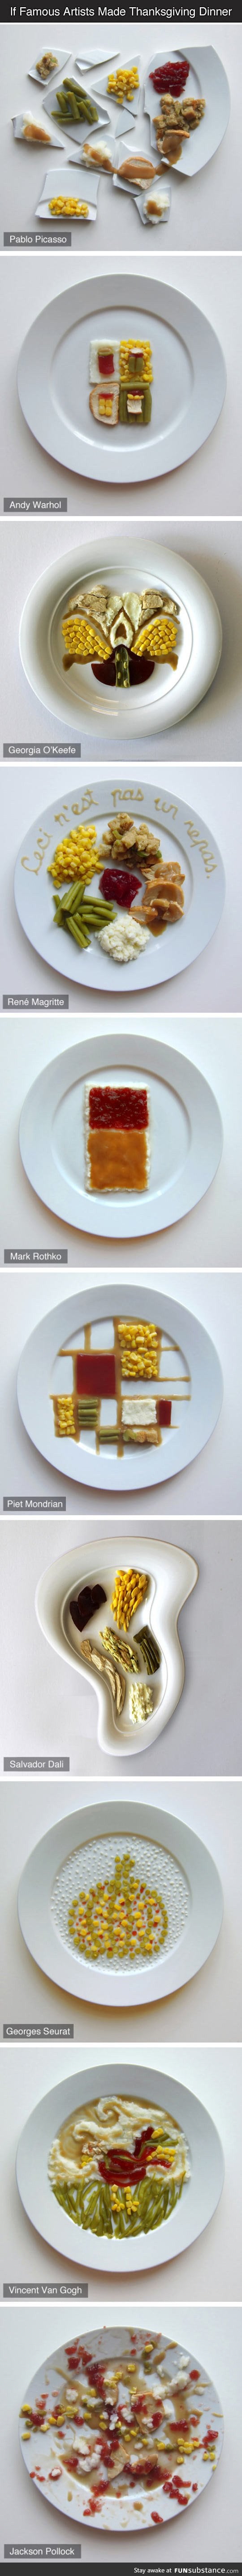 Thanksgiving dinner by famous artists